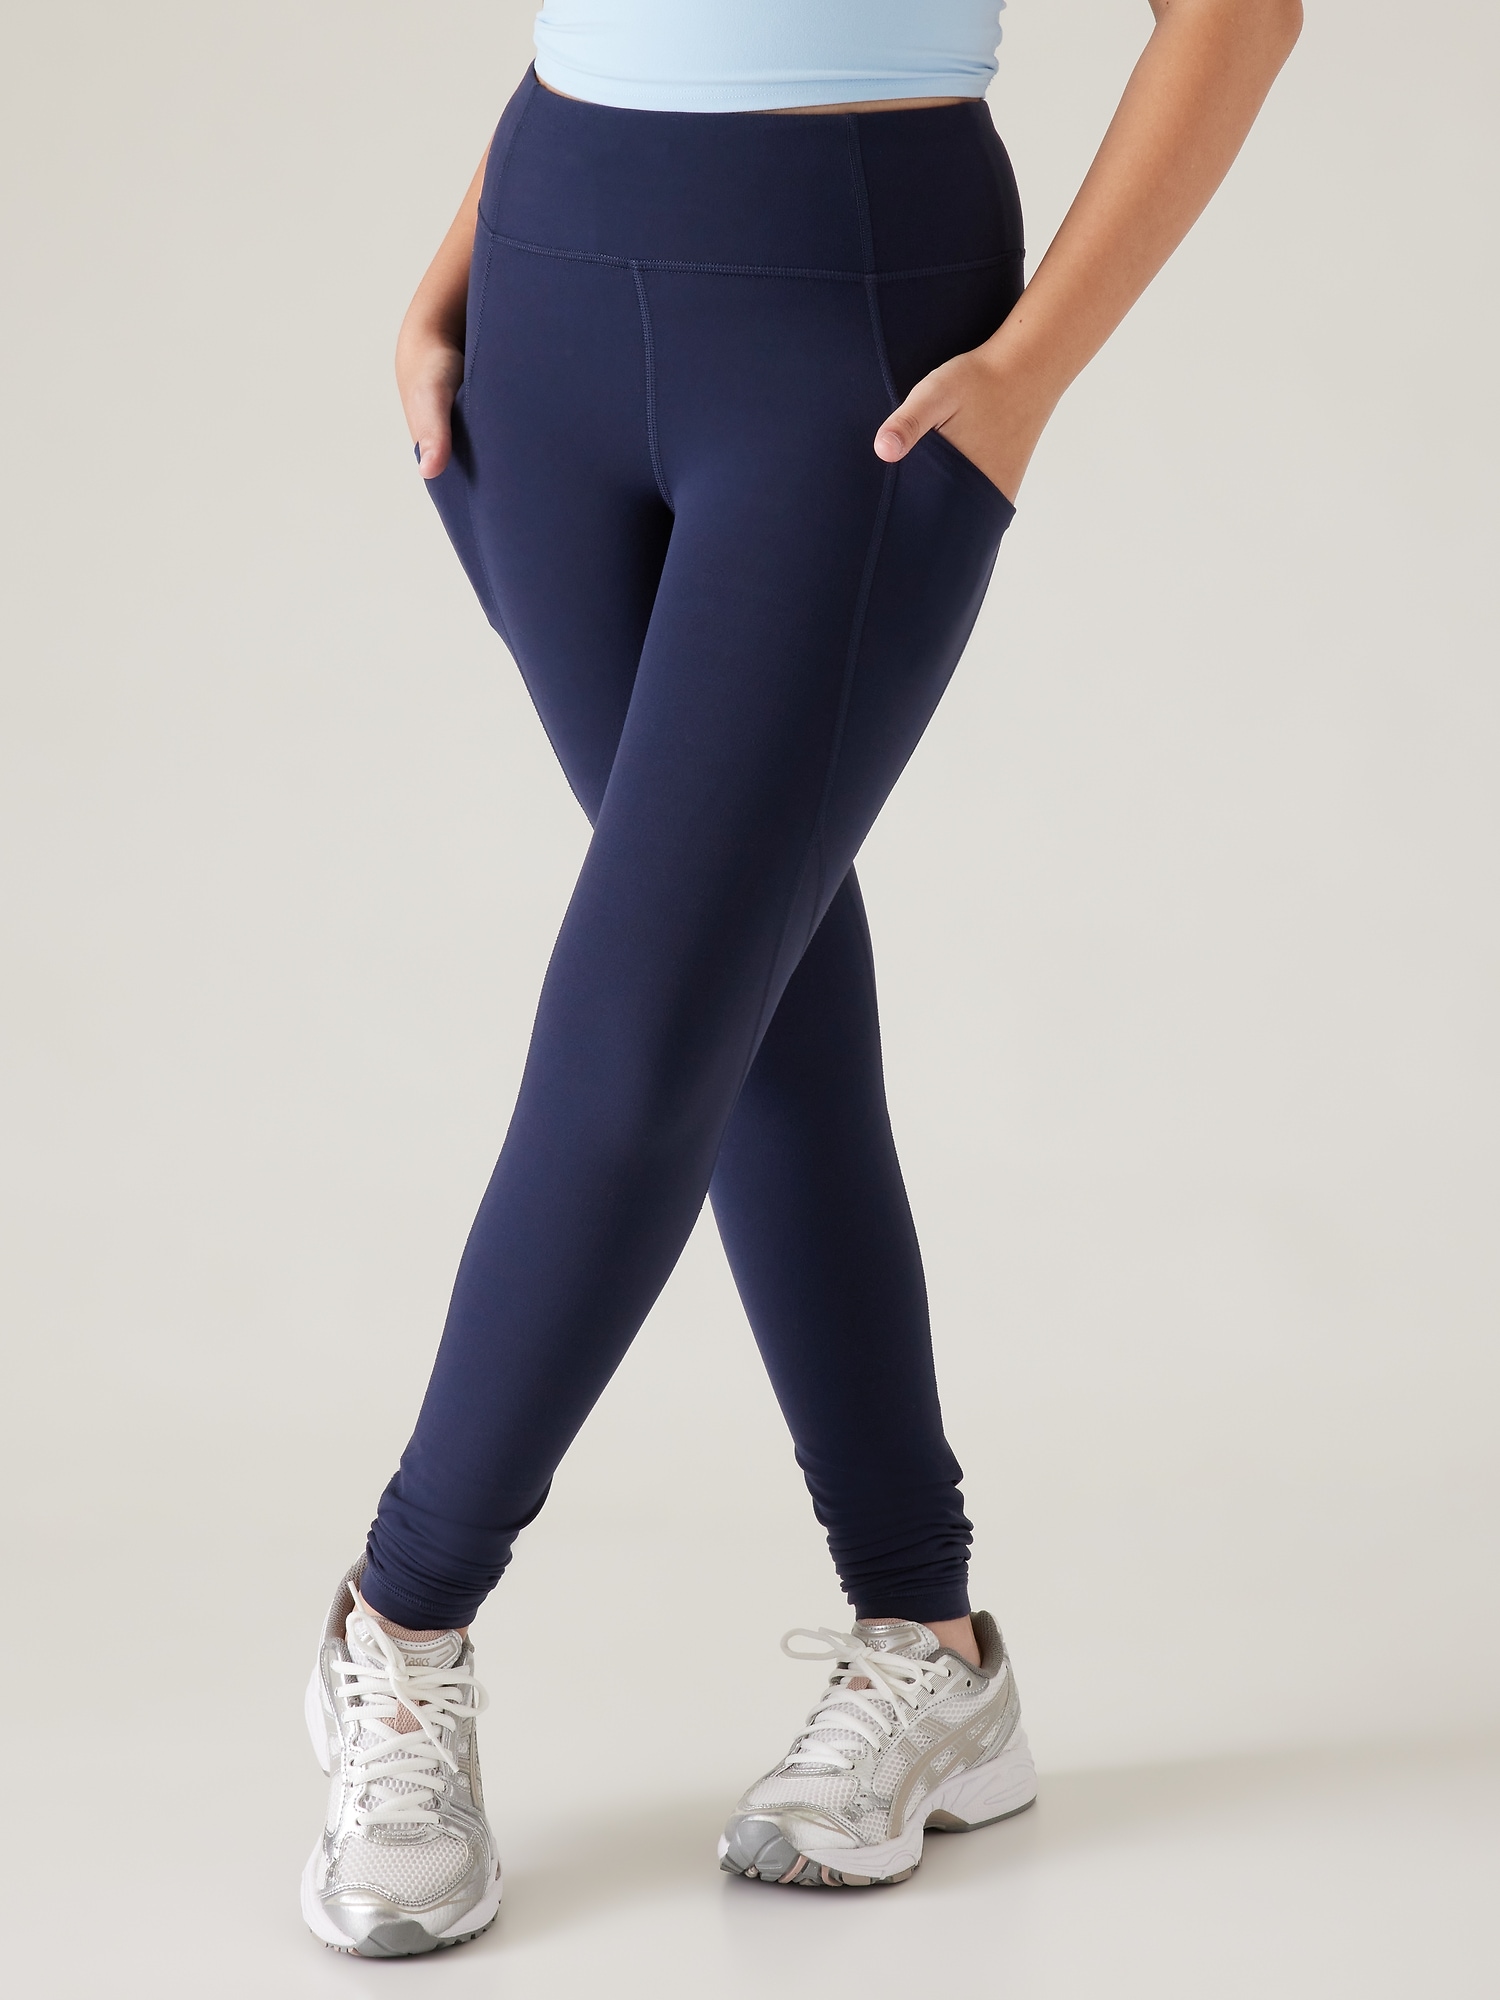 Hero blue align pant II size 6  Outfits with leggings, Lululemon